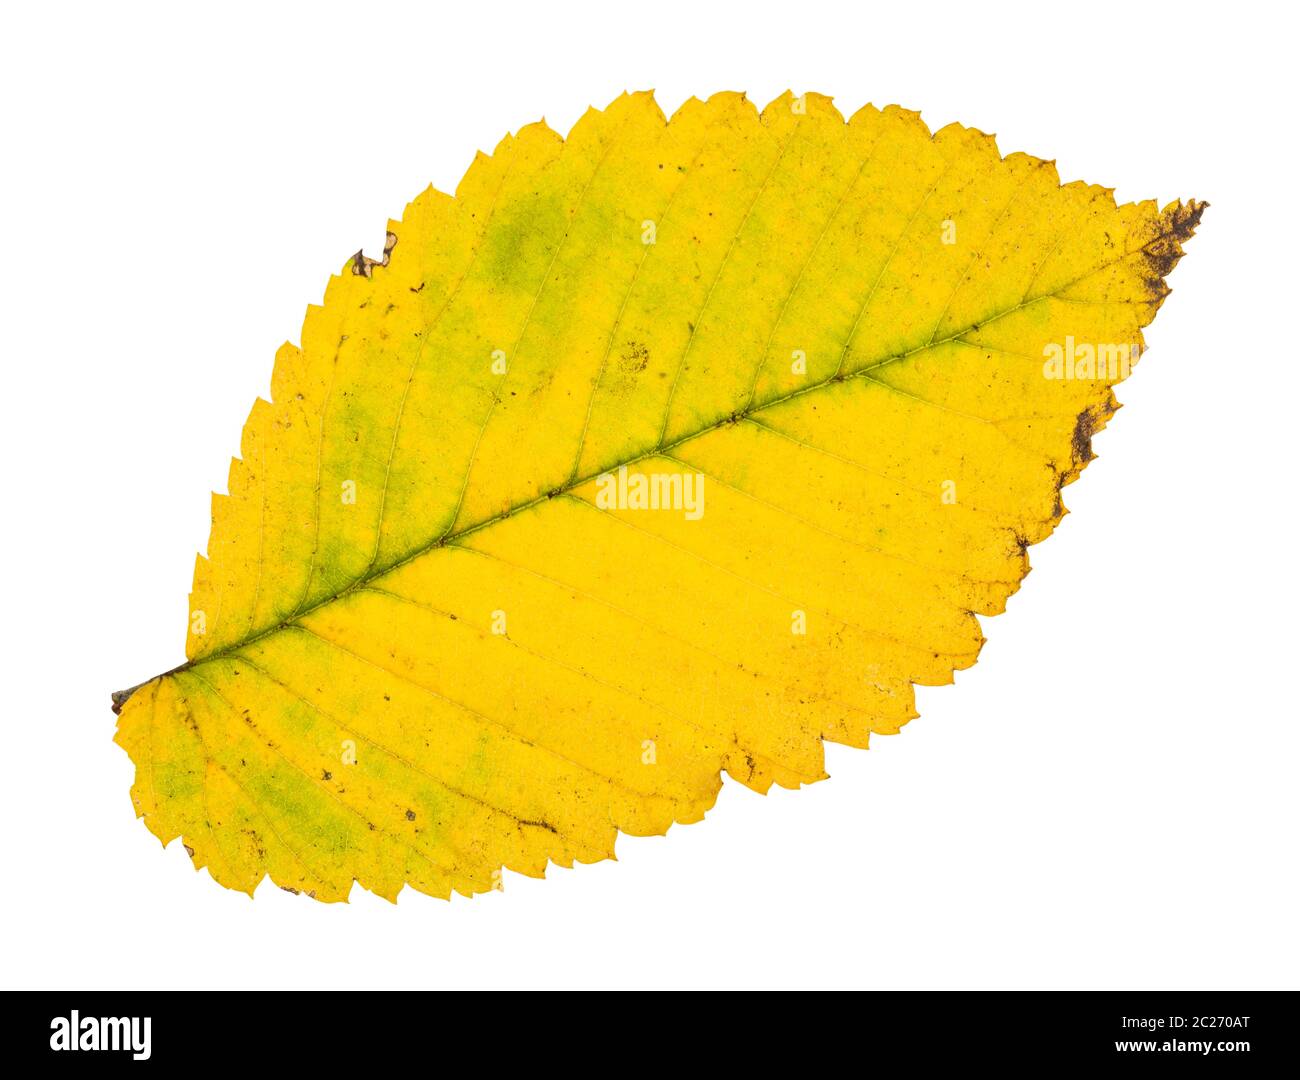 fallen yellow leaf of elm tree isolated on white background Stock Photo